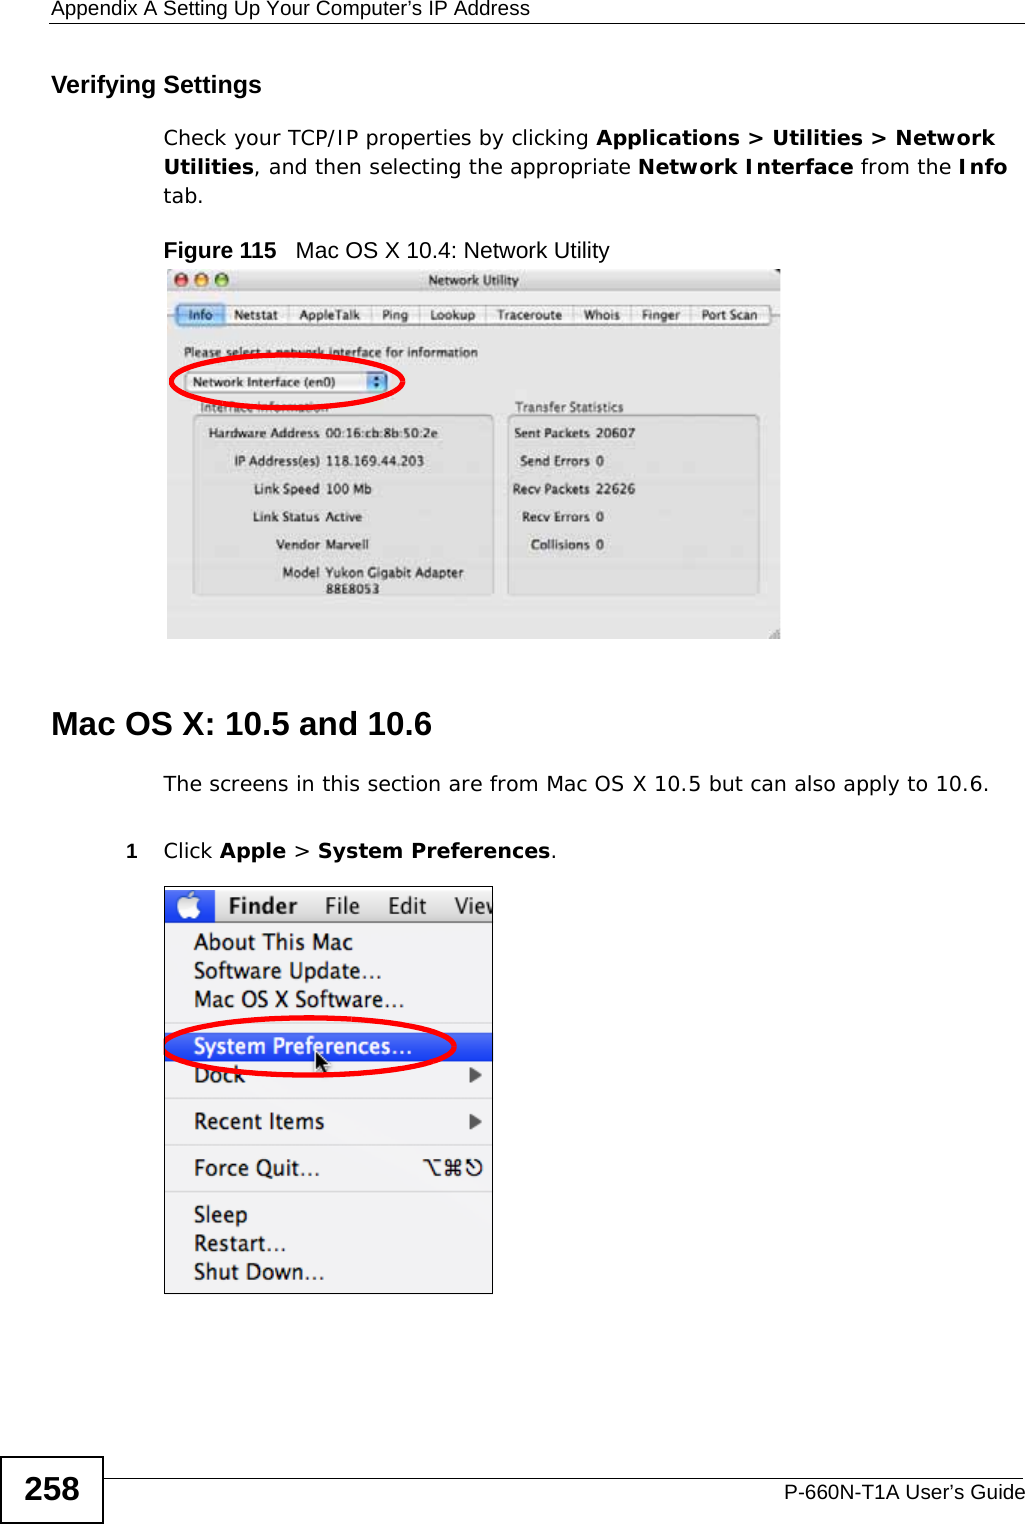 Appendix A Setting Up Your Computer’s IP AddressP-660N-T1A User’s Guide258Verifying SettingsCheck your TCP/IP properties by clicking Applications &gt; Utilities &gt; Network Utilities, and then selecting the appropriate Network Interface from the Info tab.Figure 115   Mac OS X 10.4: Network UtilityMac OS X: 10.5 and 10.6The screens in this section are from Mac OS X 10.5 but can also apply to 10.6.1Click Apple &gt; System Preferences.